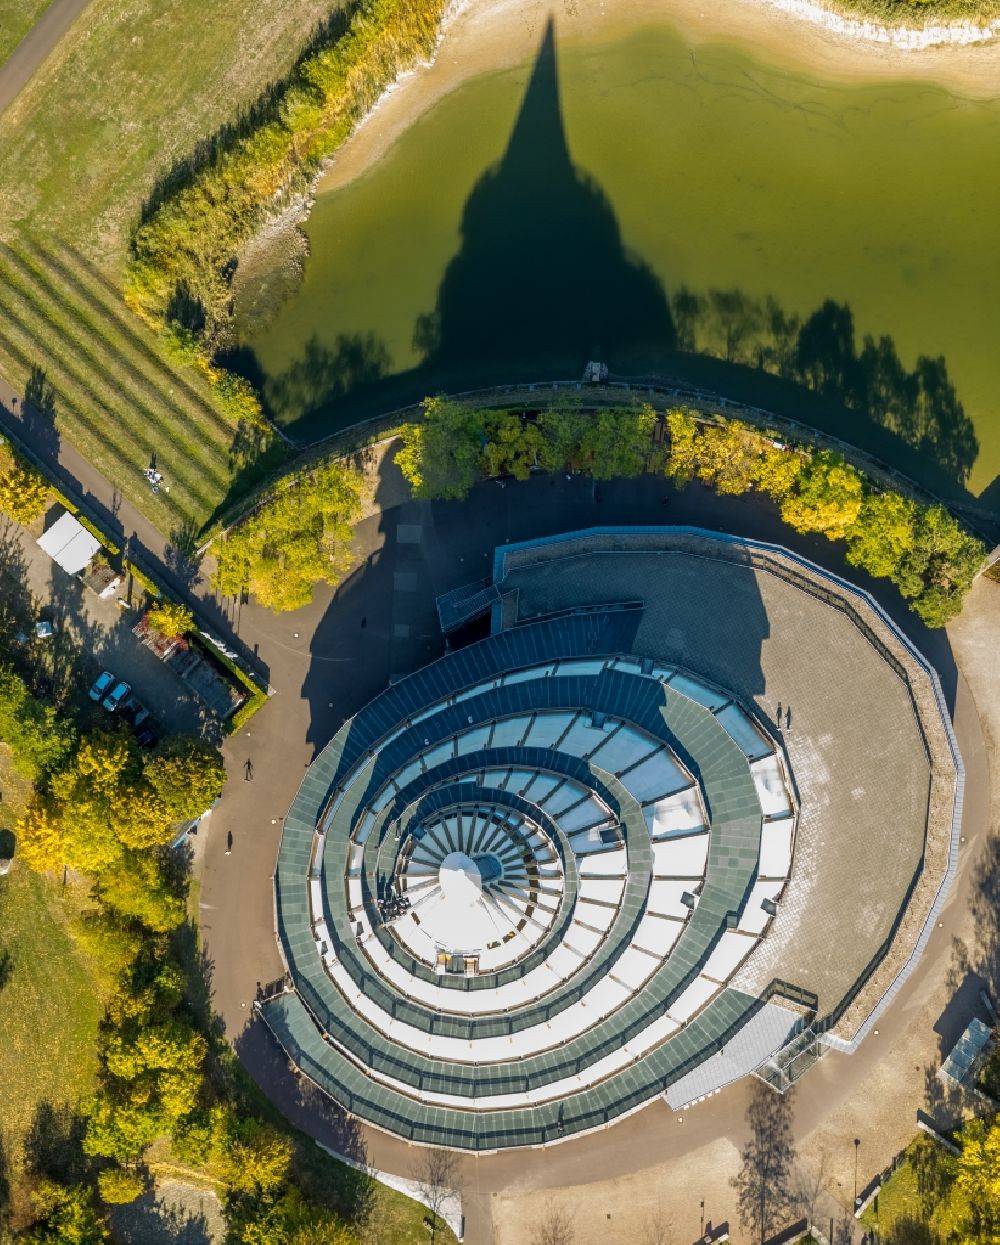 Aerial image Magdeburg - View of the Millennium Tower in Elbauenpark. The Millennium Tower in Magdeburg is was built at the Federal Garden Show